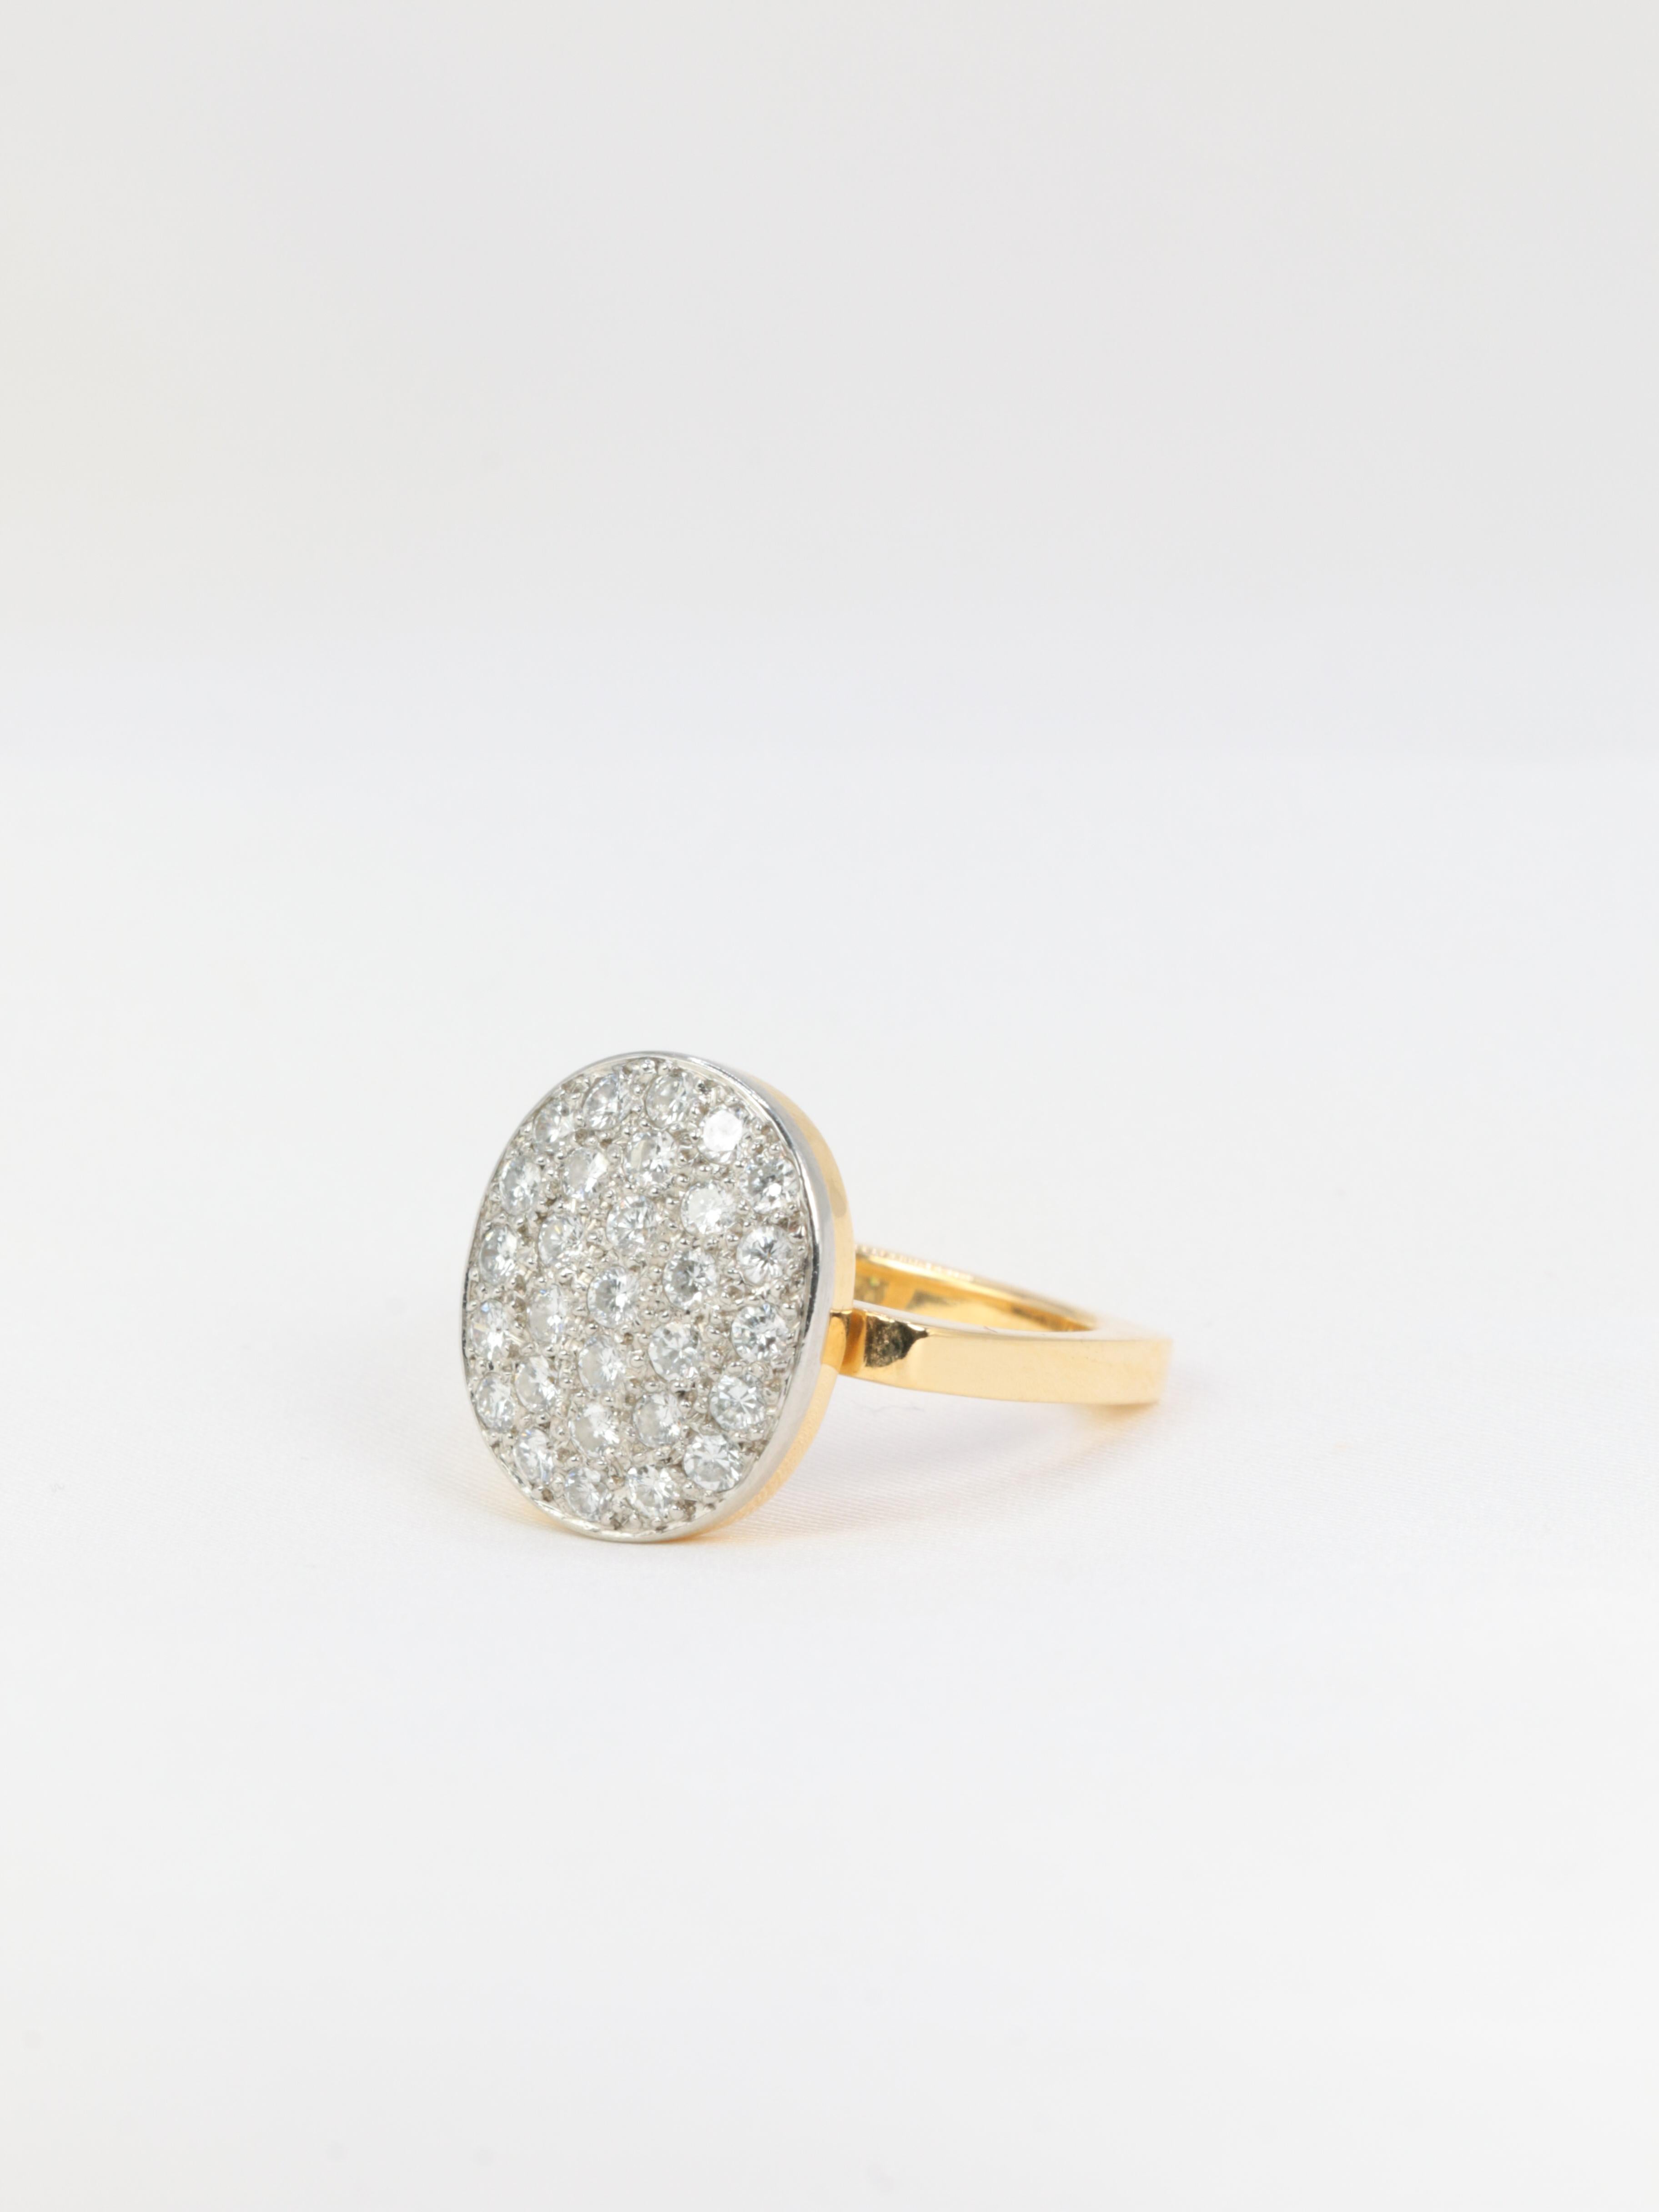 Retro White and Yellow Gold Vintage Dinh Van Ring Set with 2 Carat Diamonds For Sale